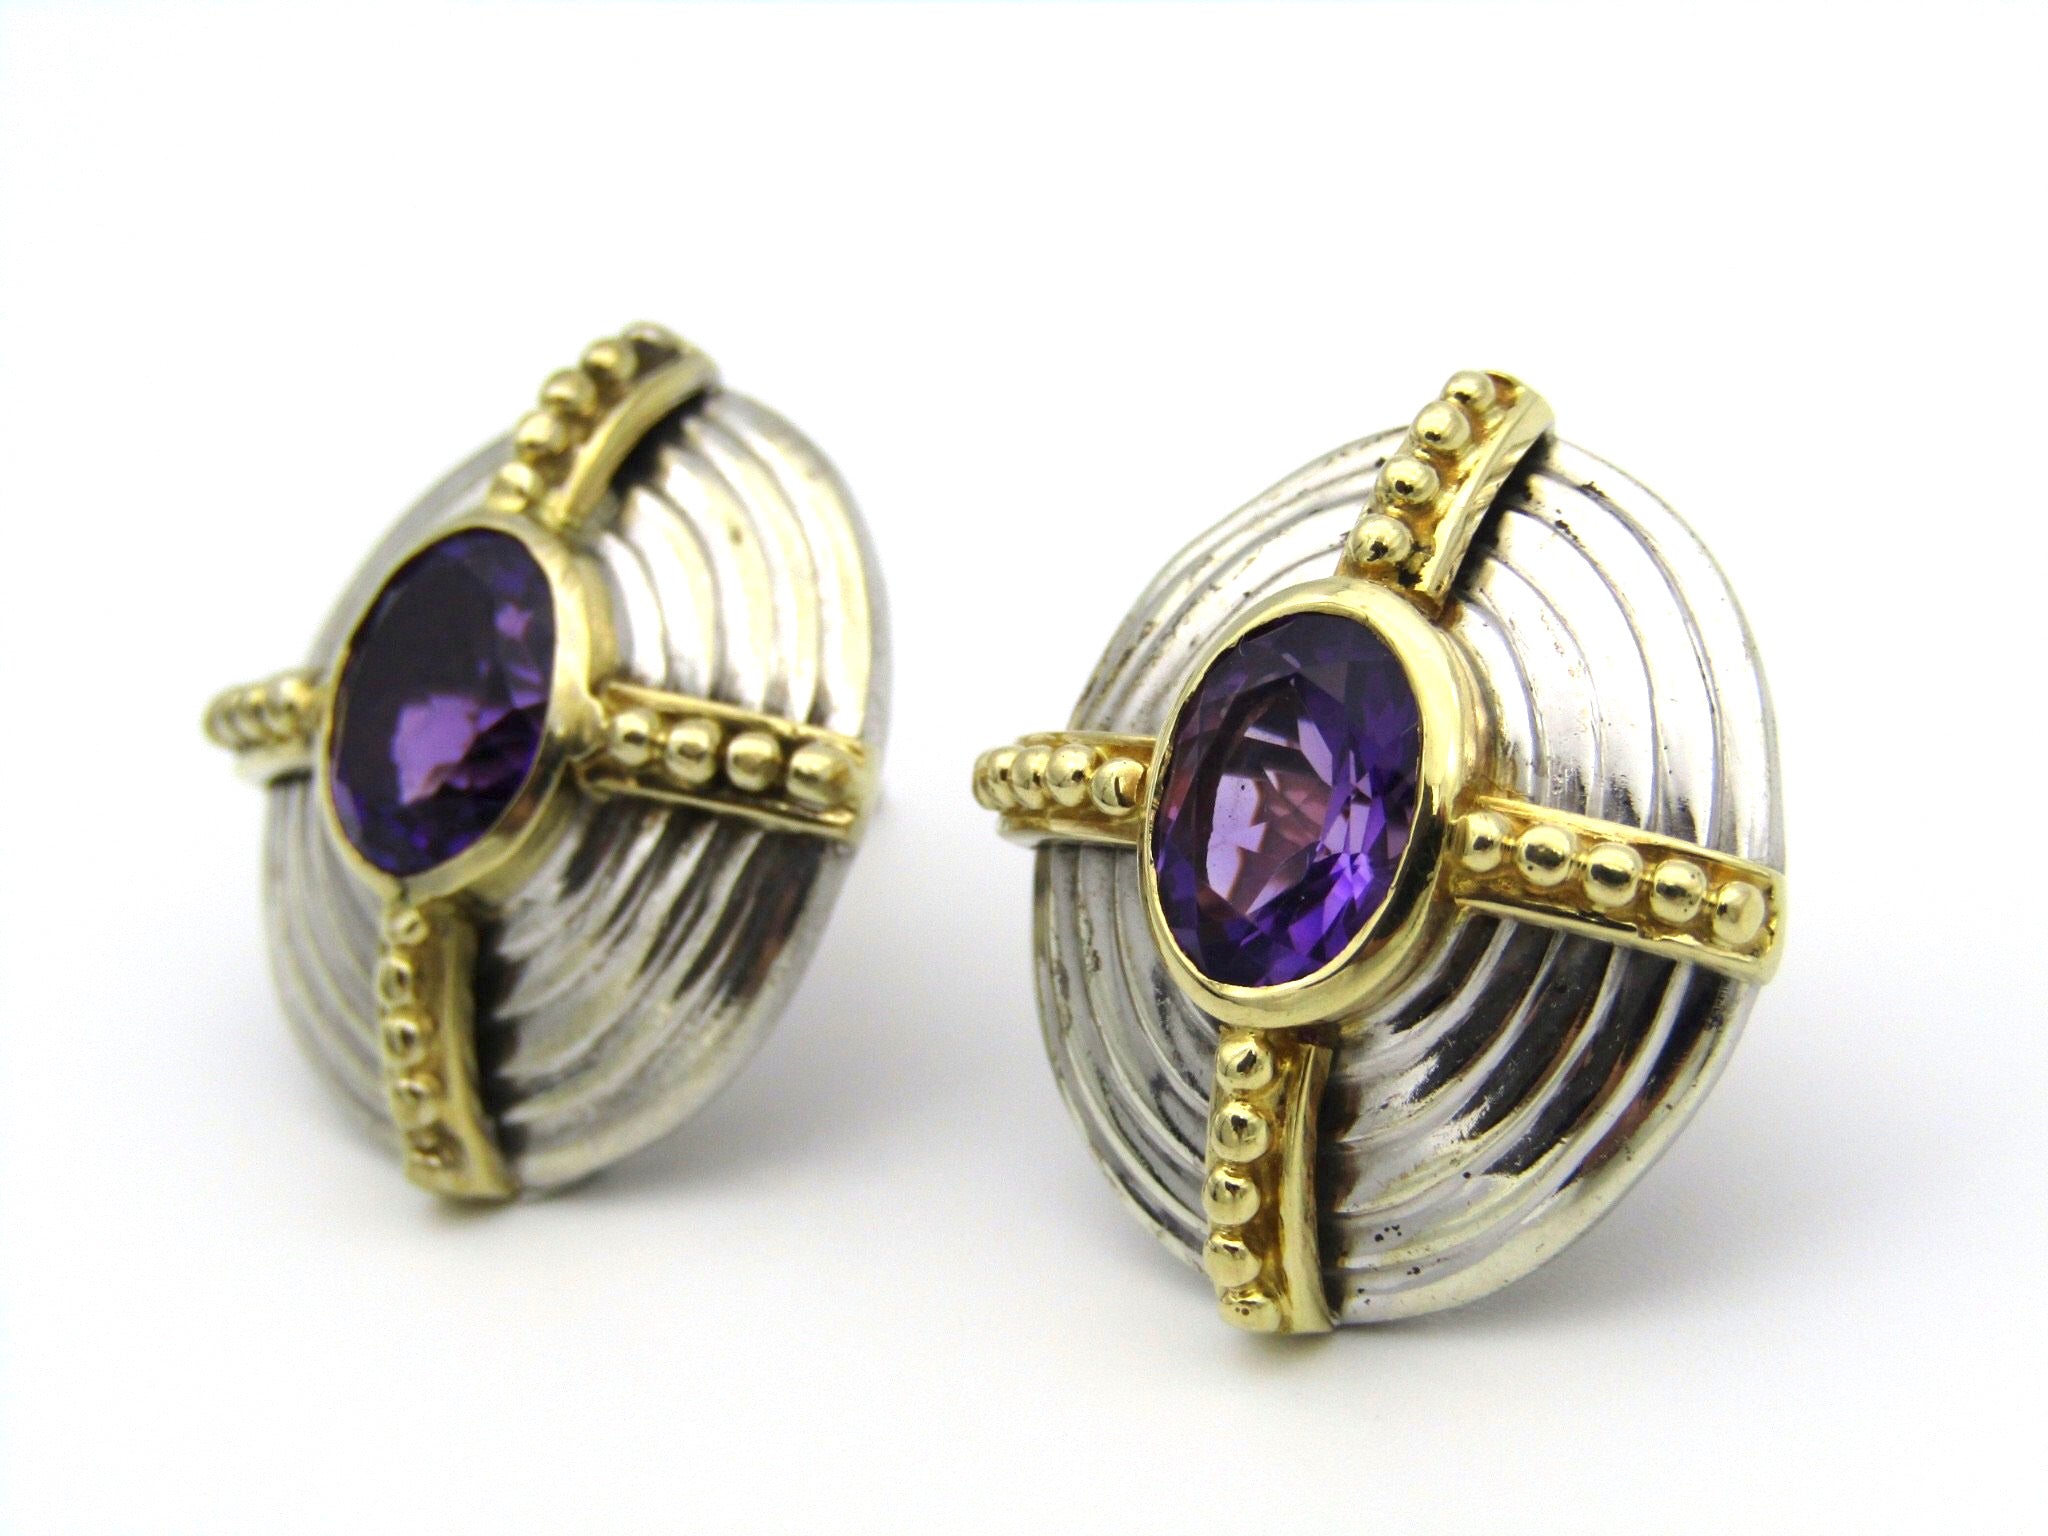 A pair of 18kt and 9kt gold amethyst earrings.